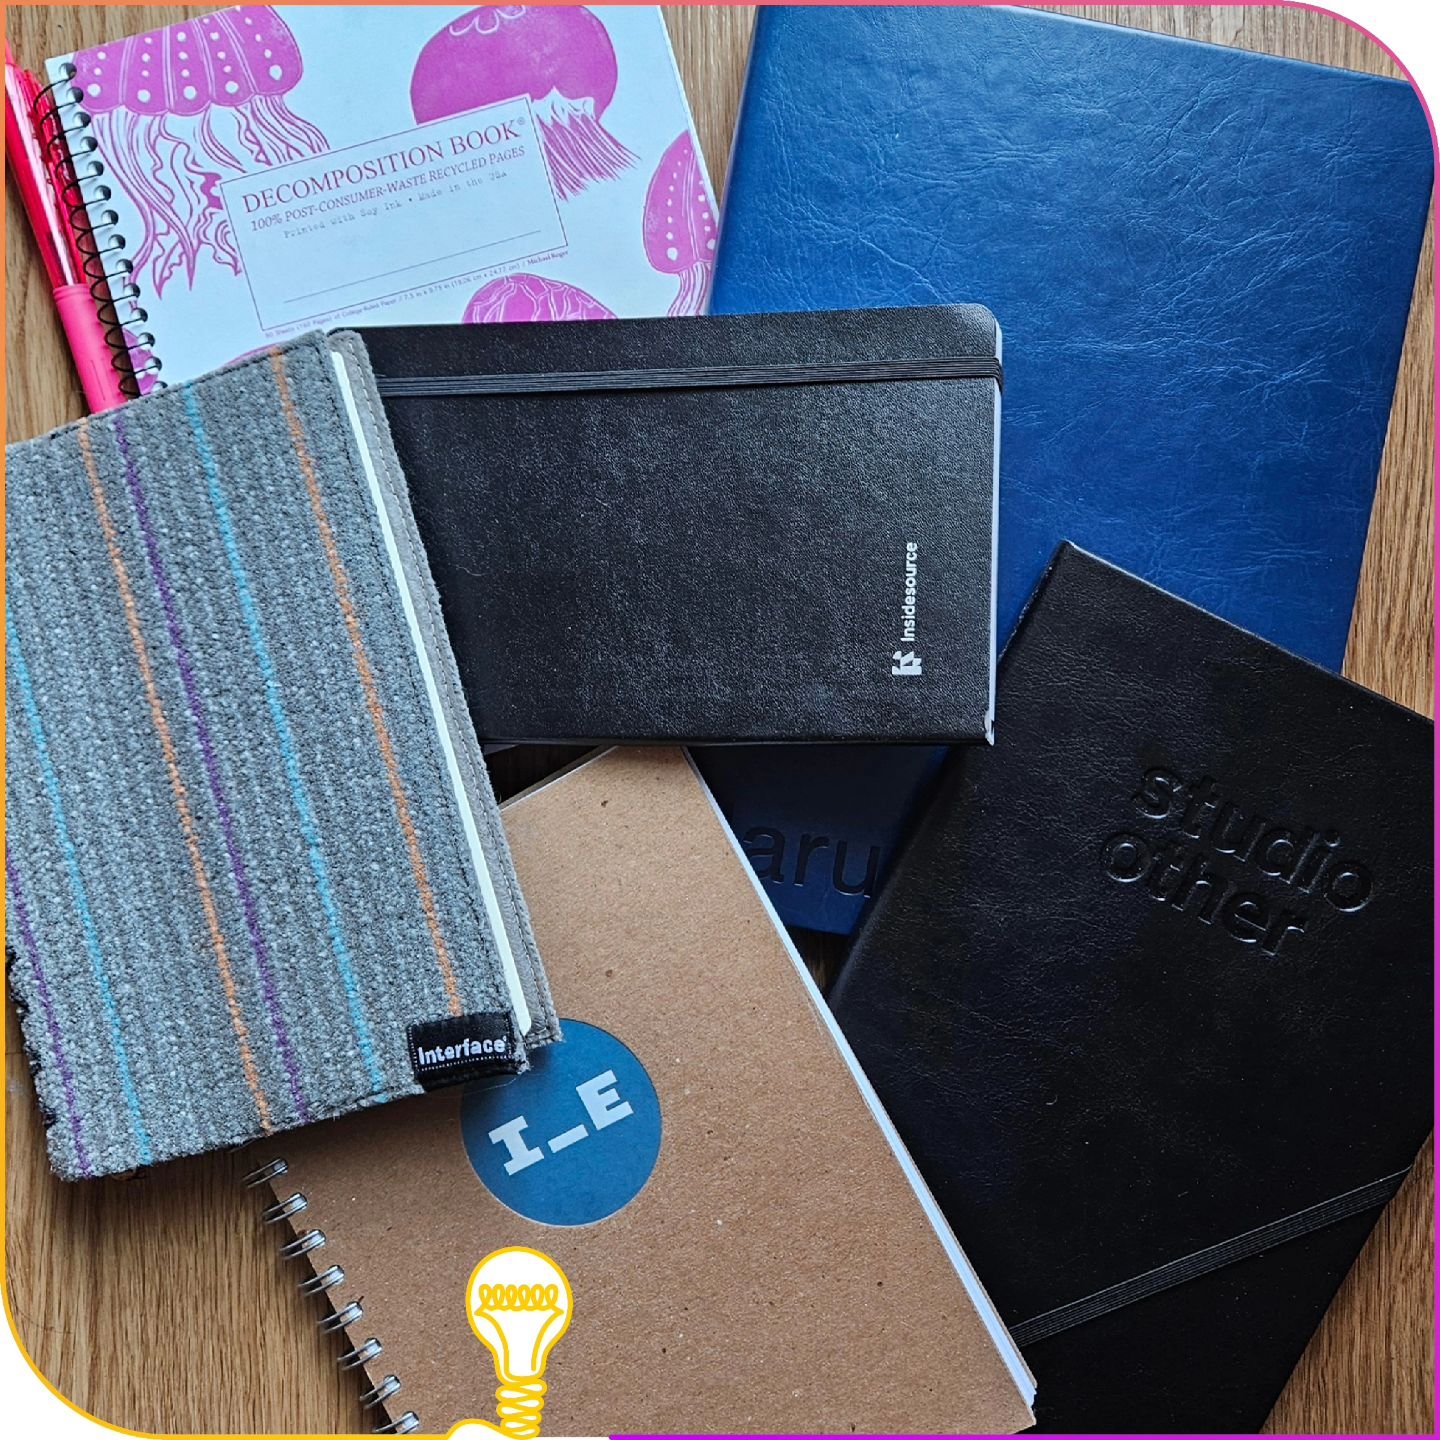 It's National Notebook Day! As designers, notebooks are integral to our day-to-day tasks, whether for notes from a meeting or a sketch of an idea. We're so grateful that so many of our partners choose notebooks as swag!
.
#notebook #nationalnotebookd